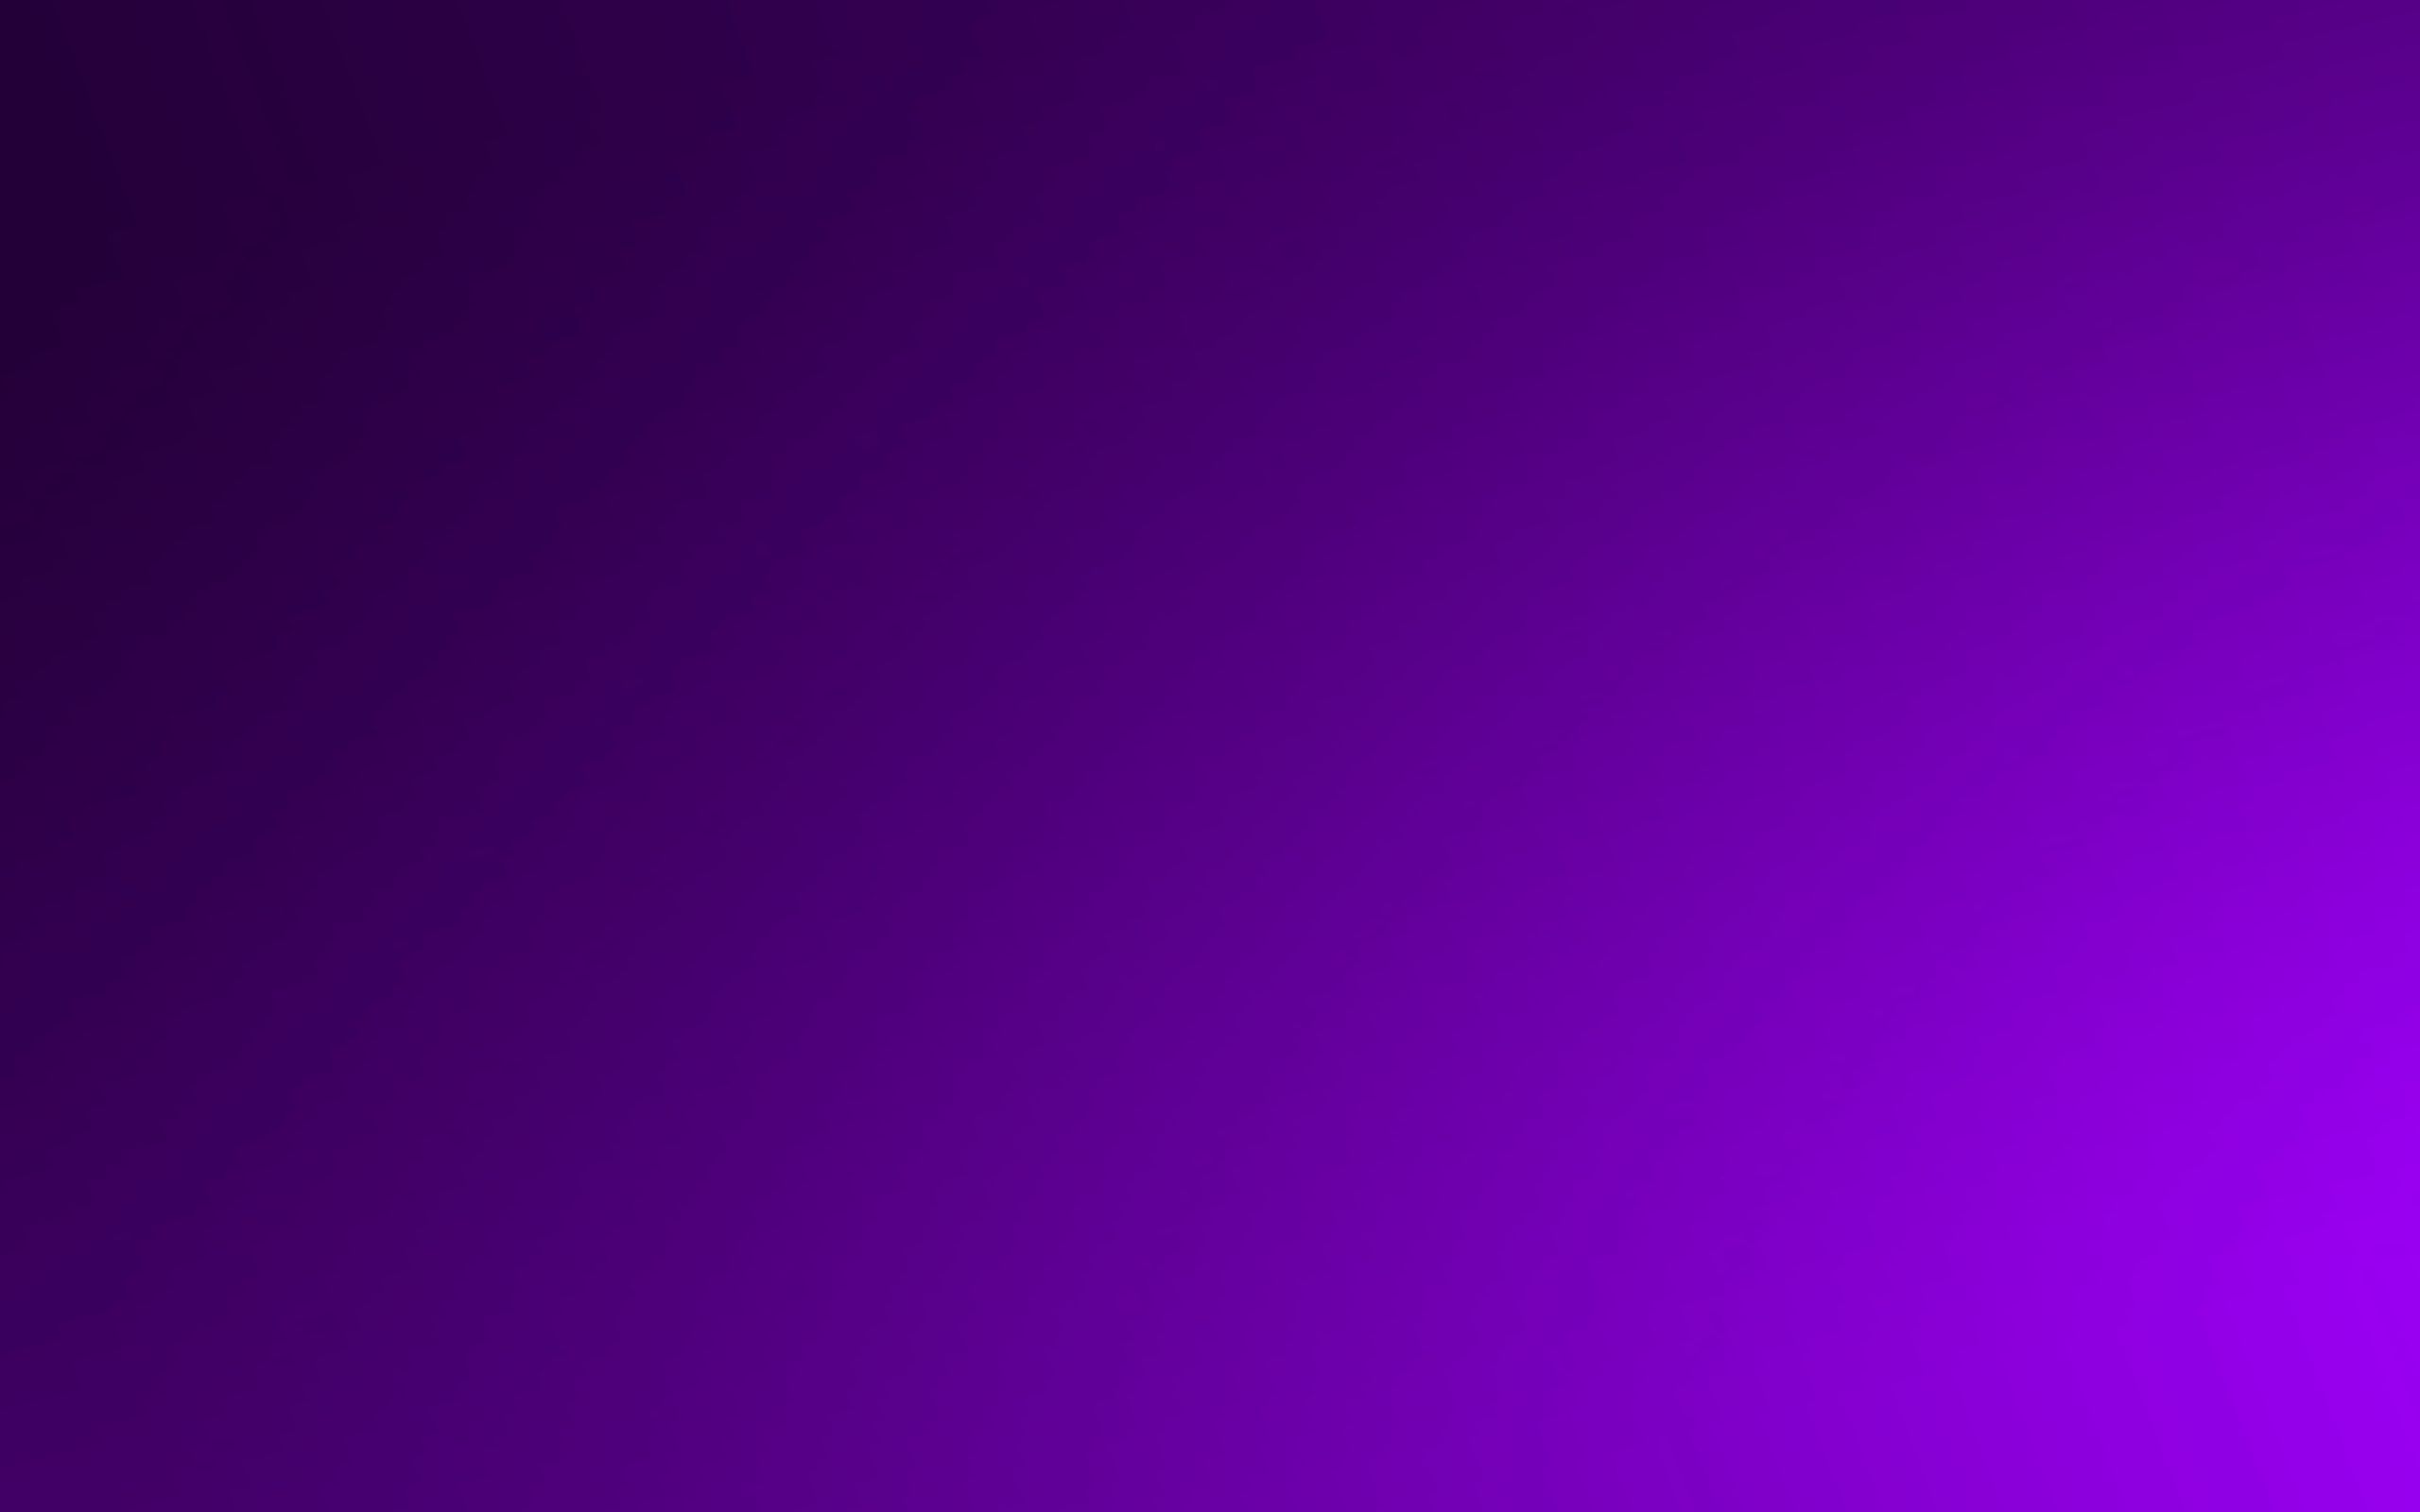 solid, violet, purple, background, abstract